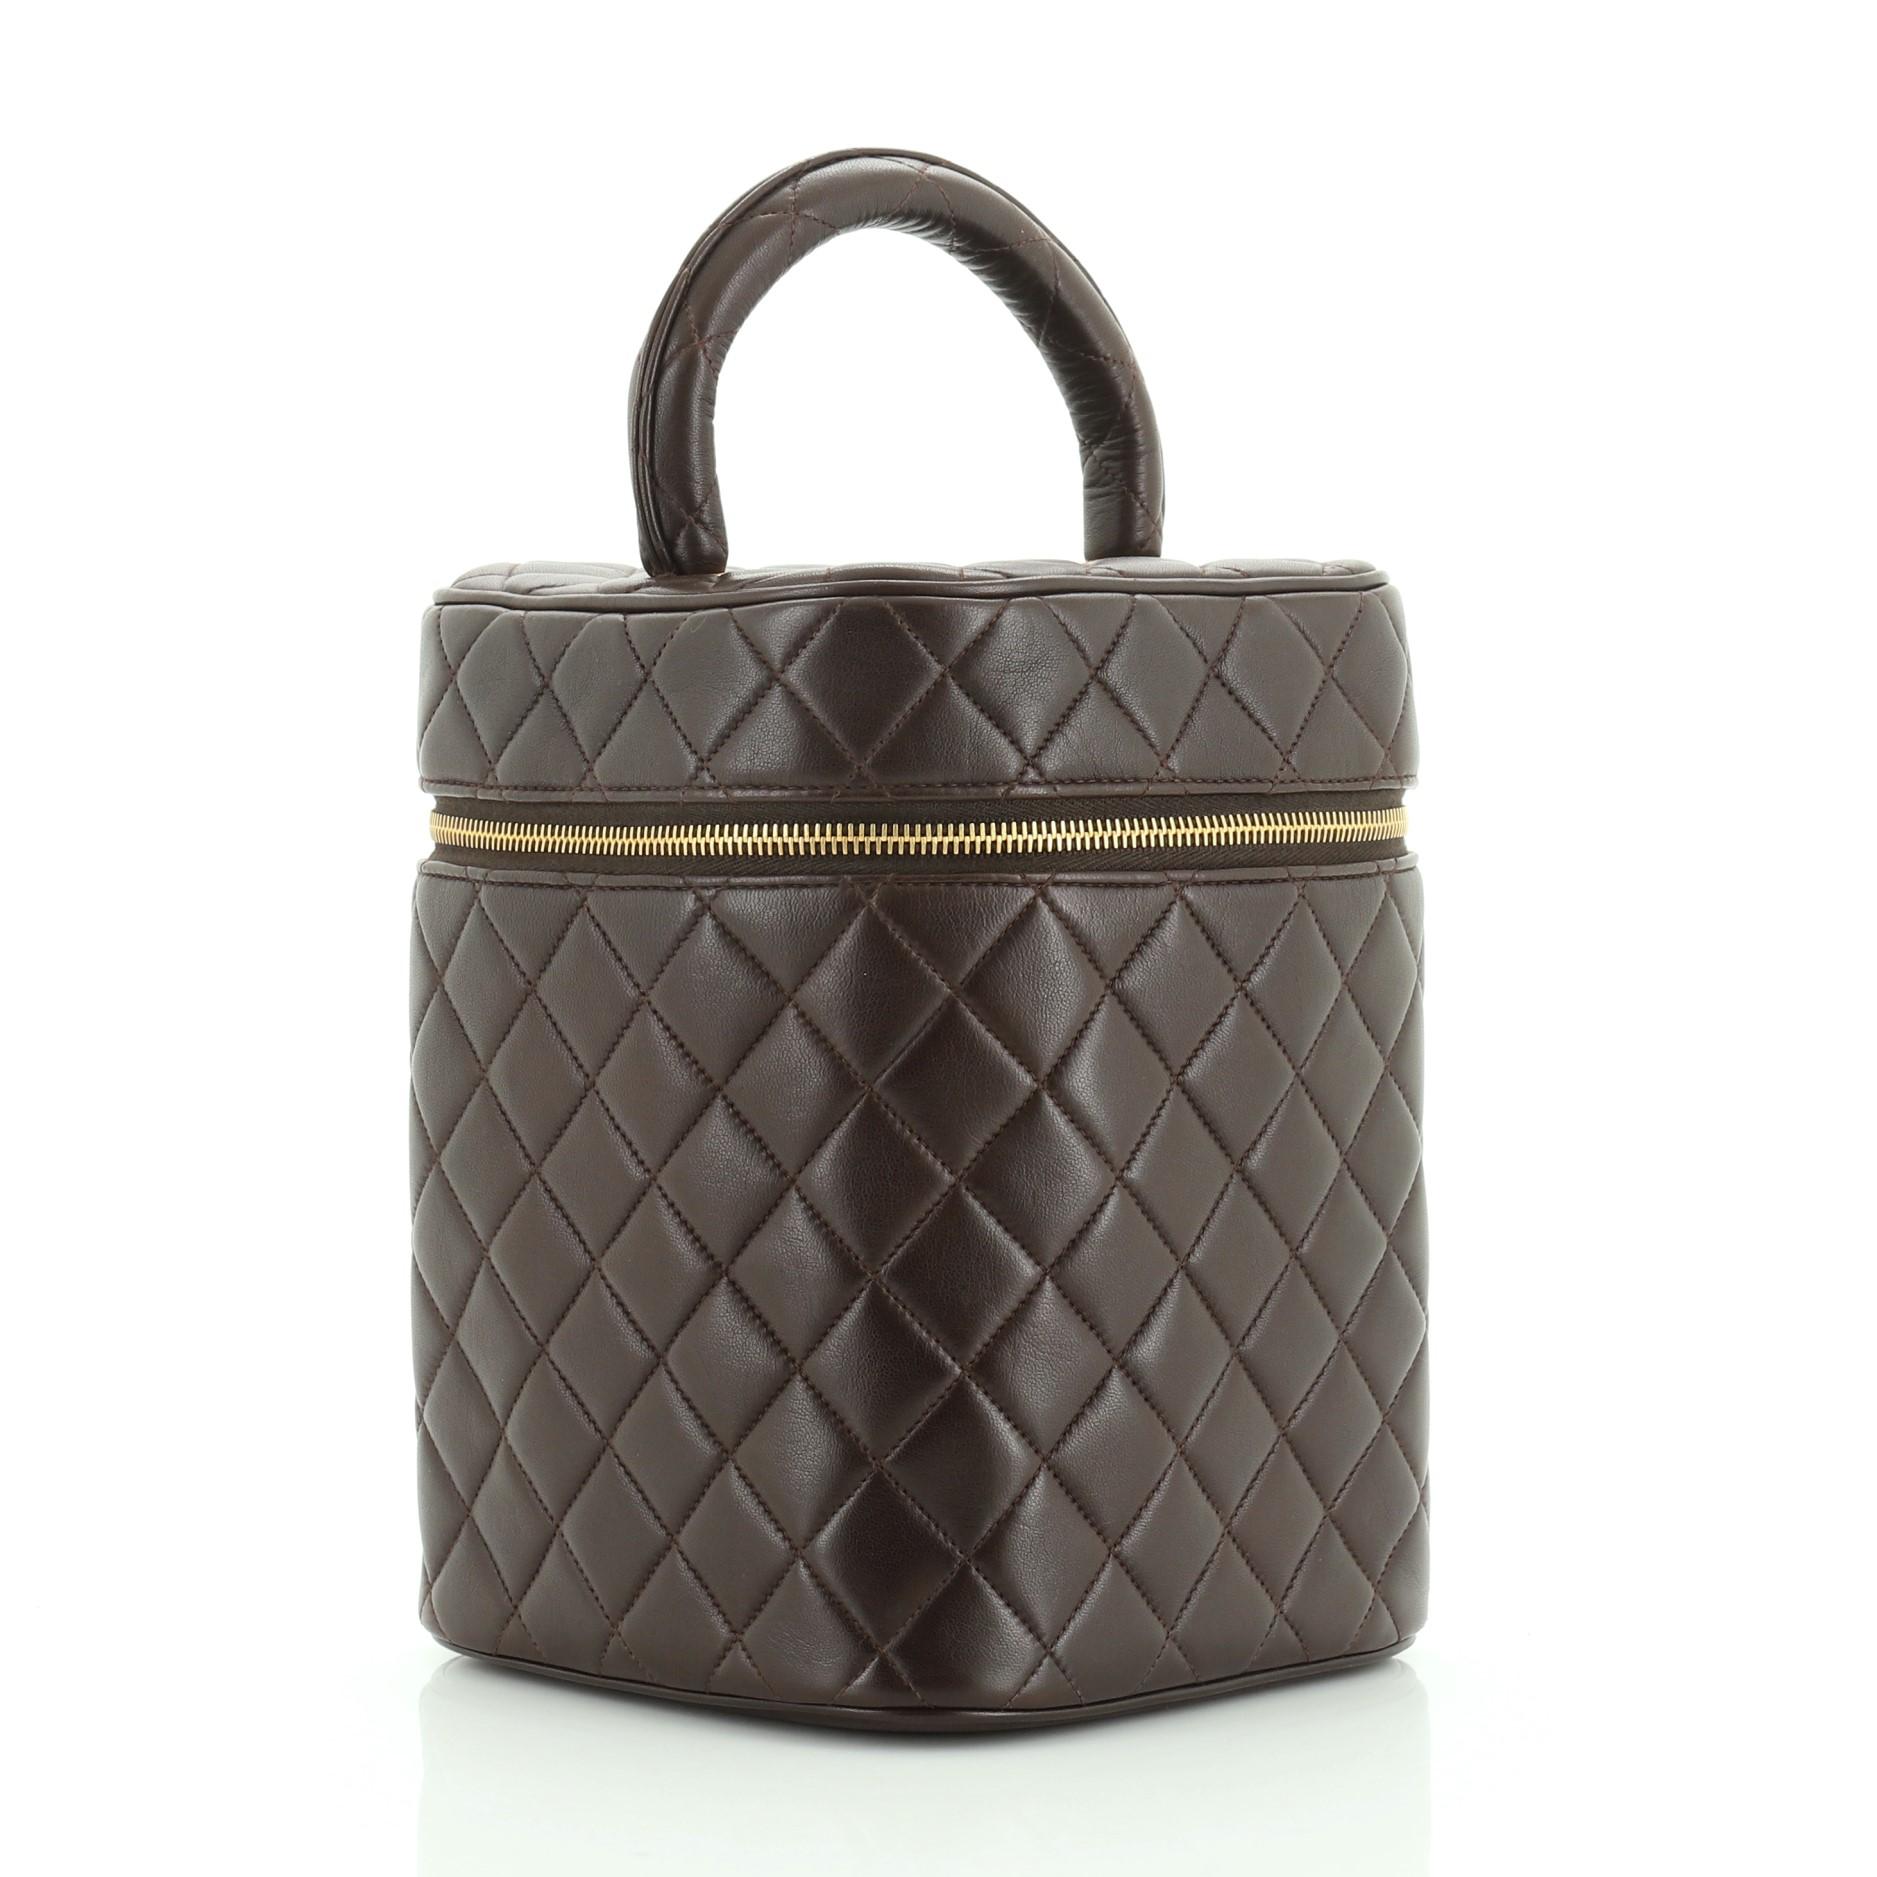 This Chanel Vintage Cosmetic Case Quilted Lambskin Tall, crafted in brown lambskin leather, features a leather top handle, and gold-tone hardware. Its zip-around closure opens to a brown leather interior with slip pocket. Hologram sticker reads: